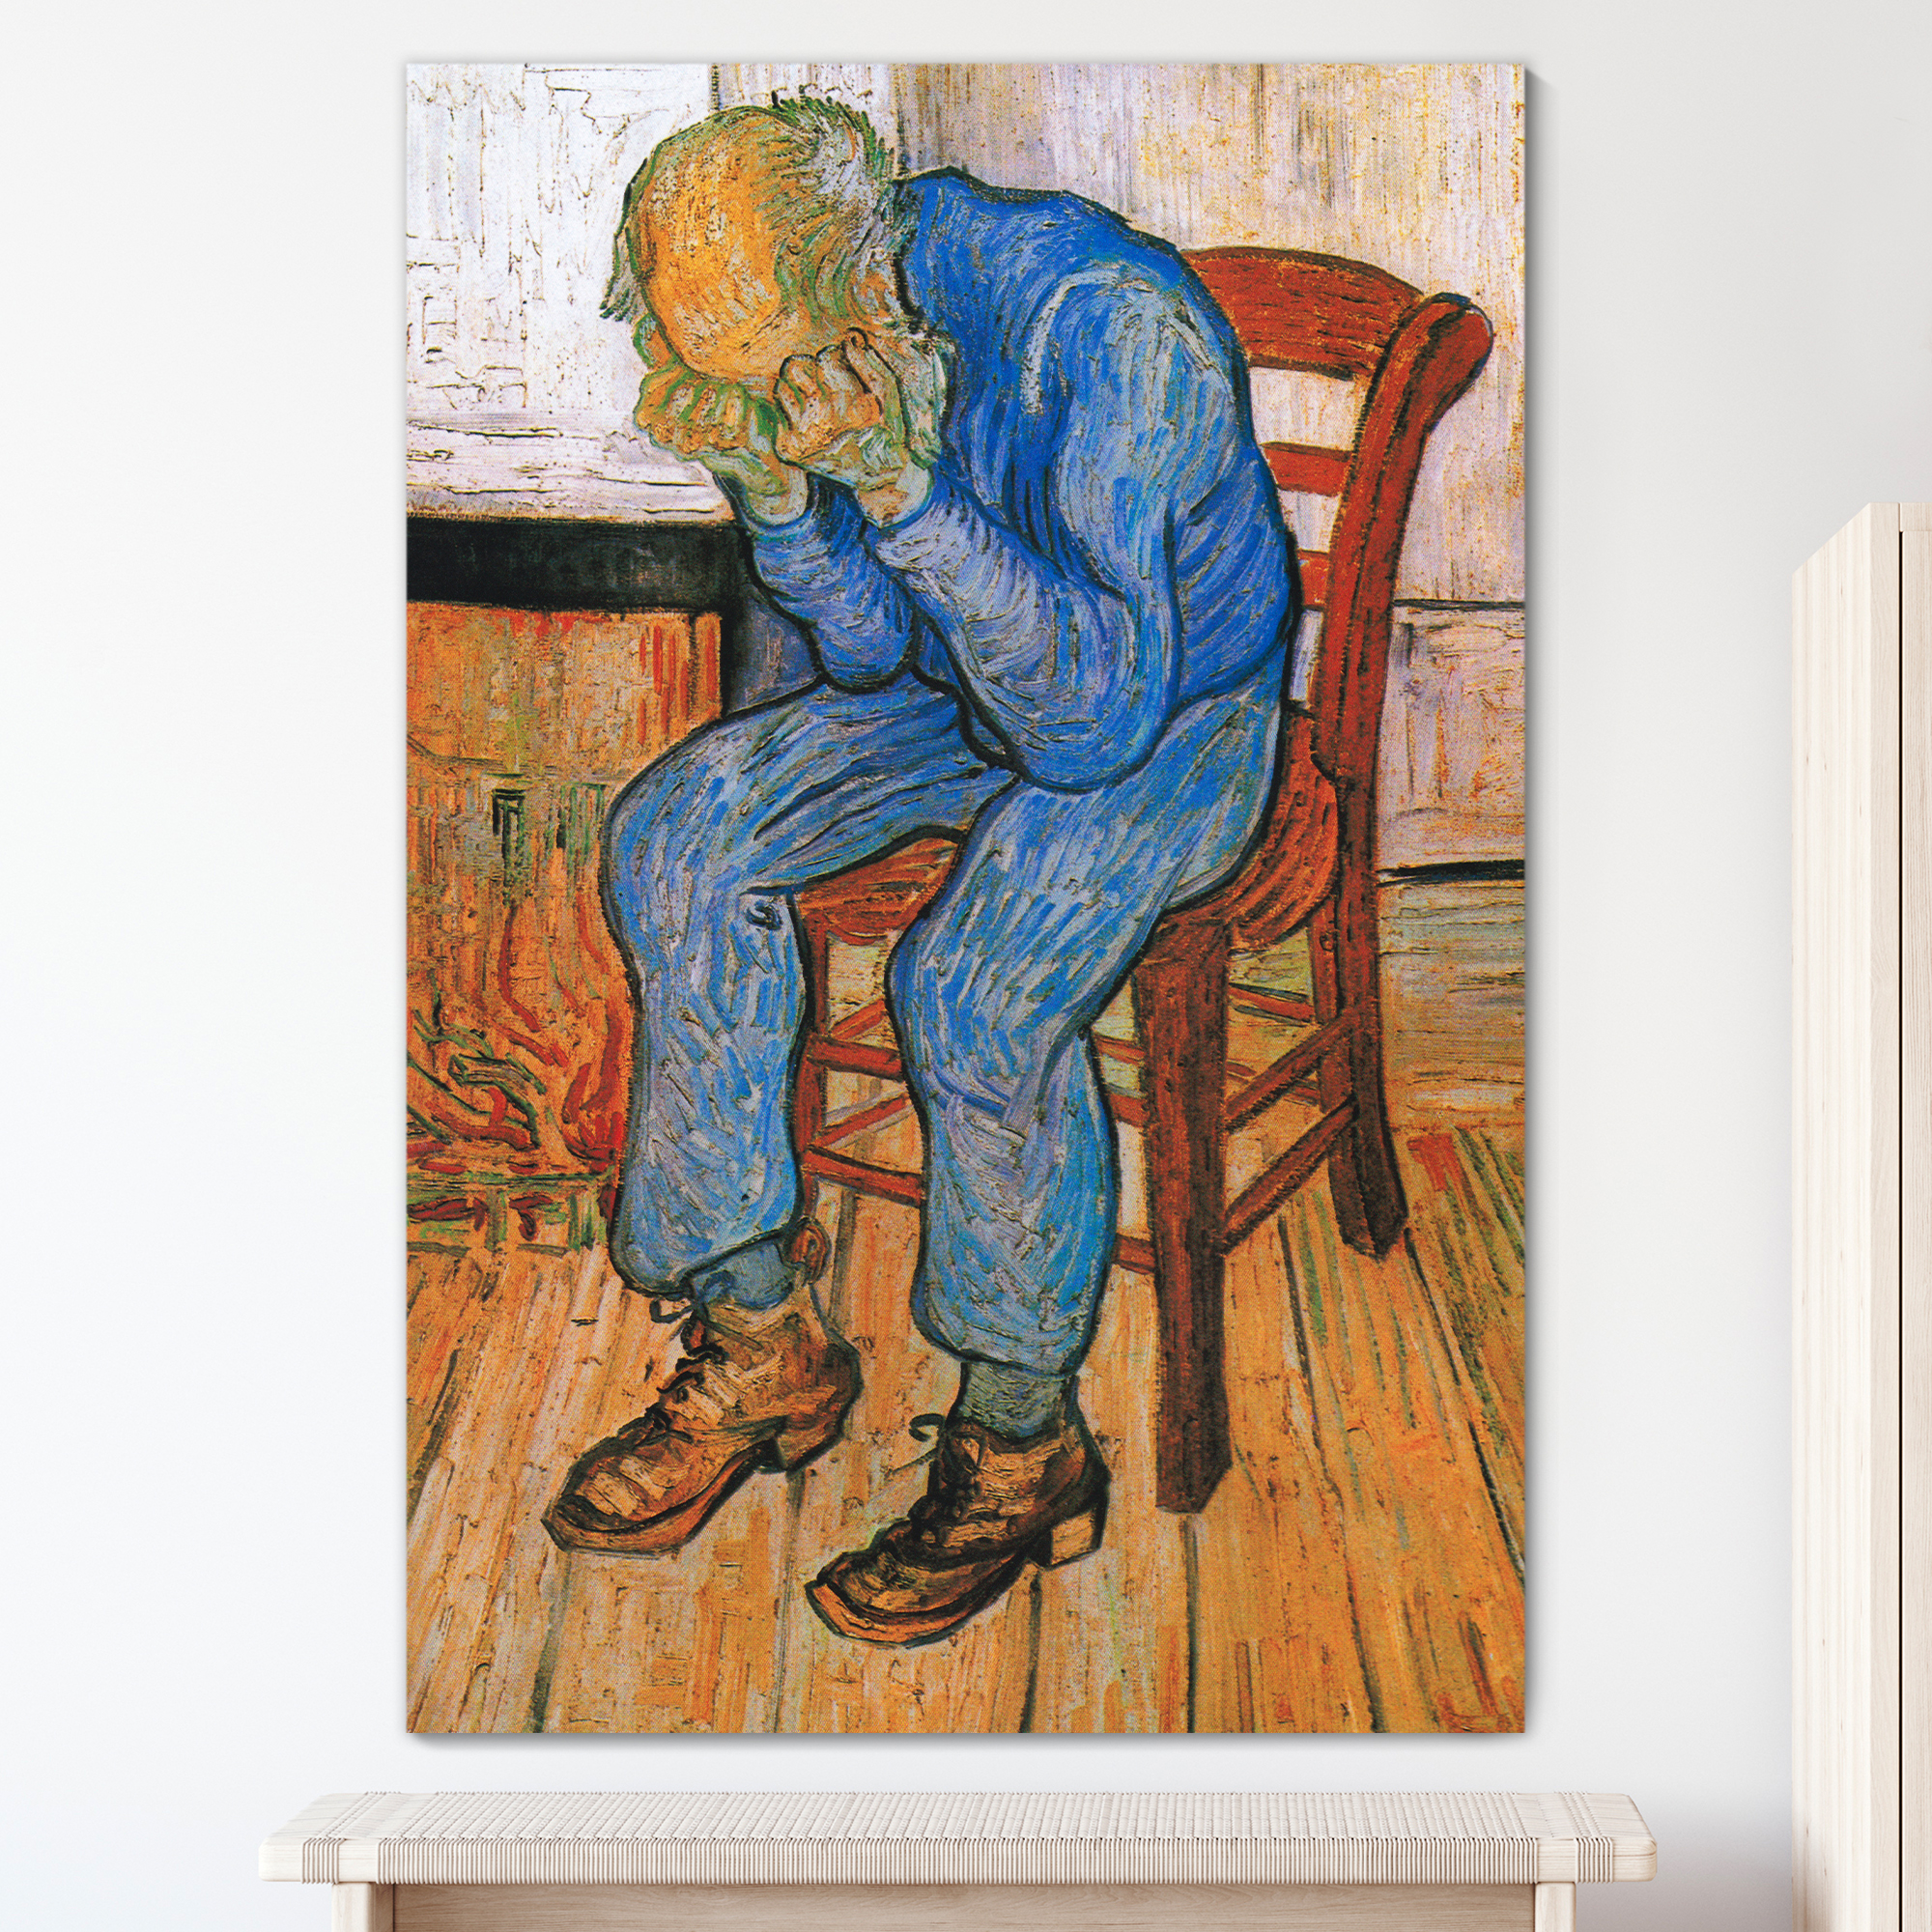 At Eternity's Gate (or Sorrowing Old Man) by Vincent Van Gogh - Oil Painting Reproduction on Canvas Prints Wall Art, Ready to Hang - 24